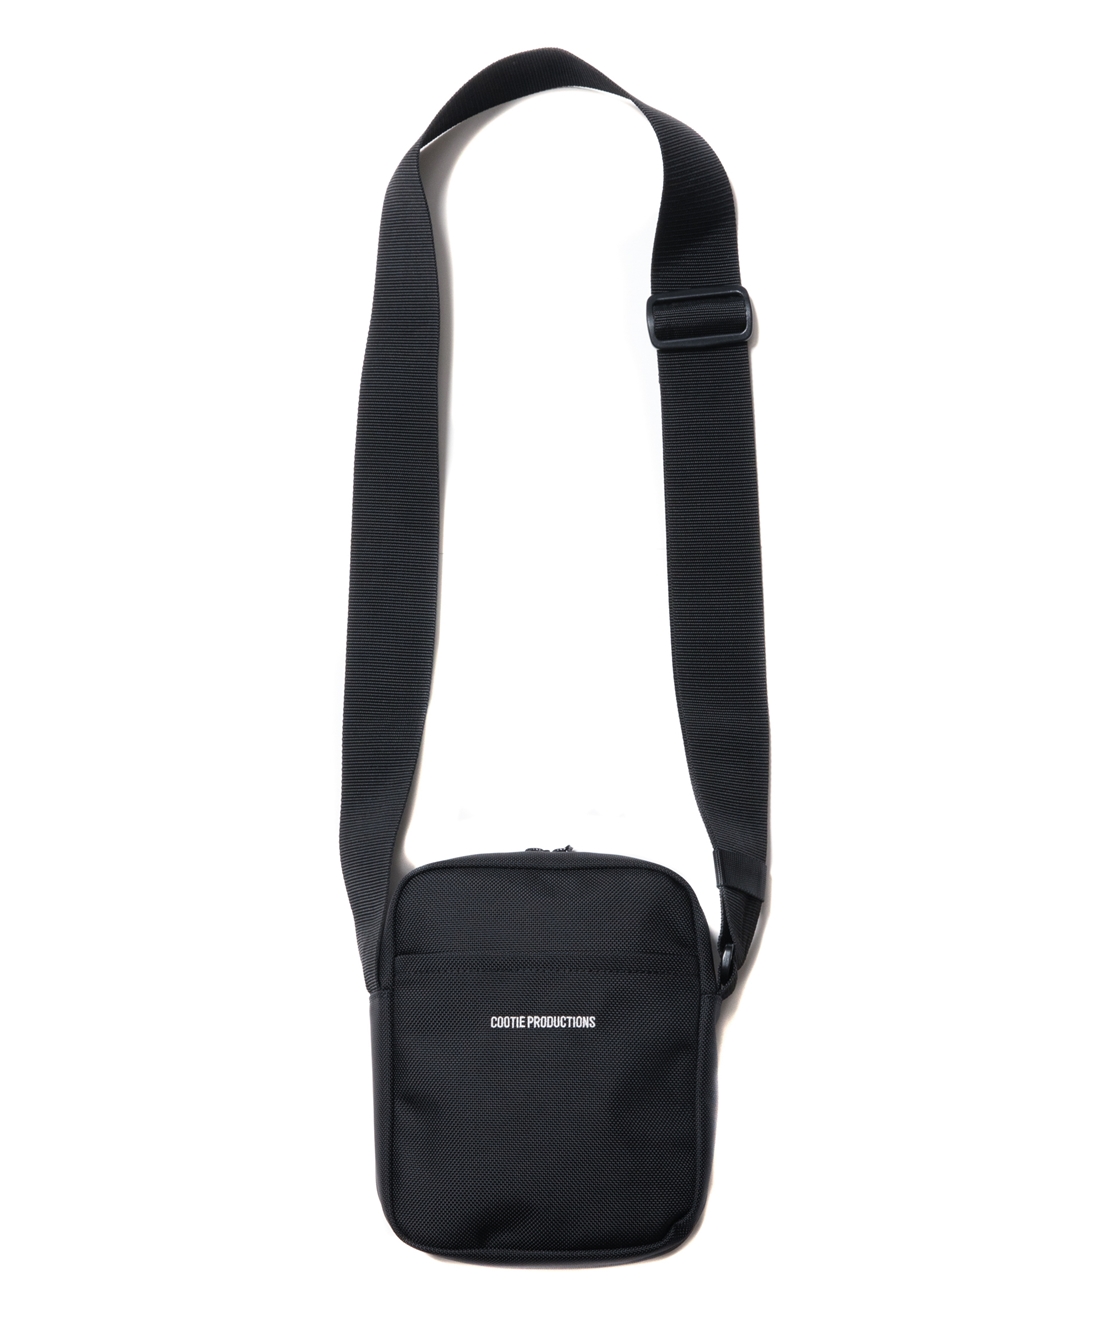 COOTIE PRODUCTIONS/Compact Shoulder Bag（Black）［コンパクト